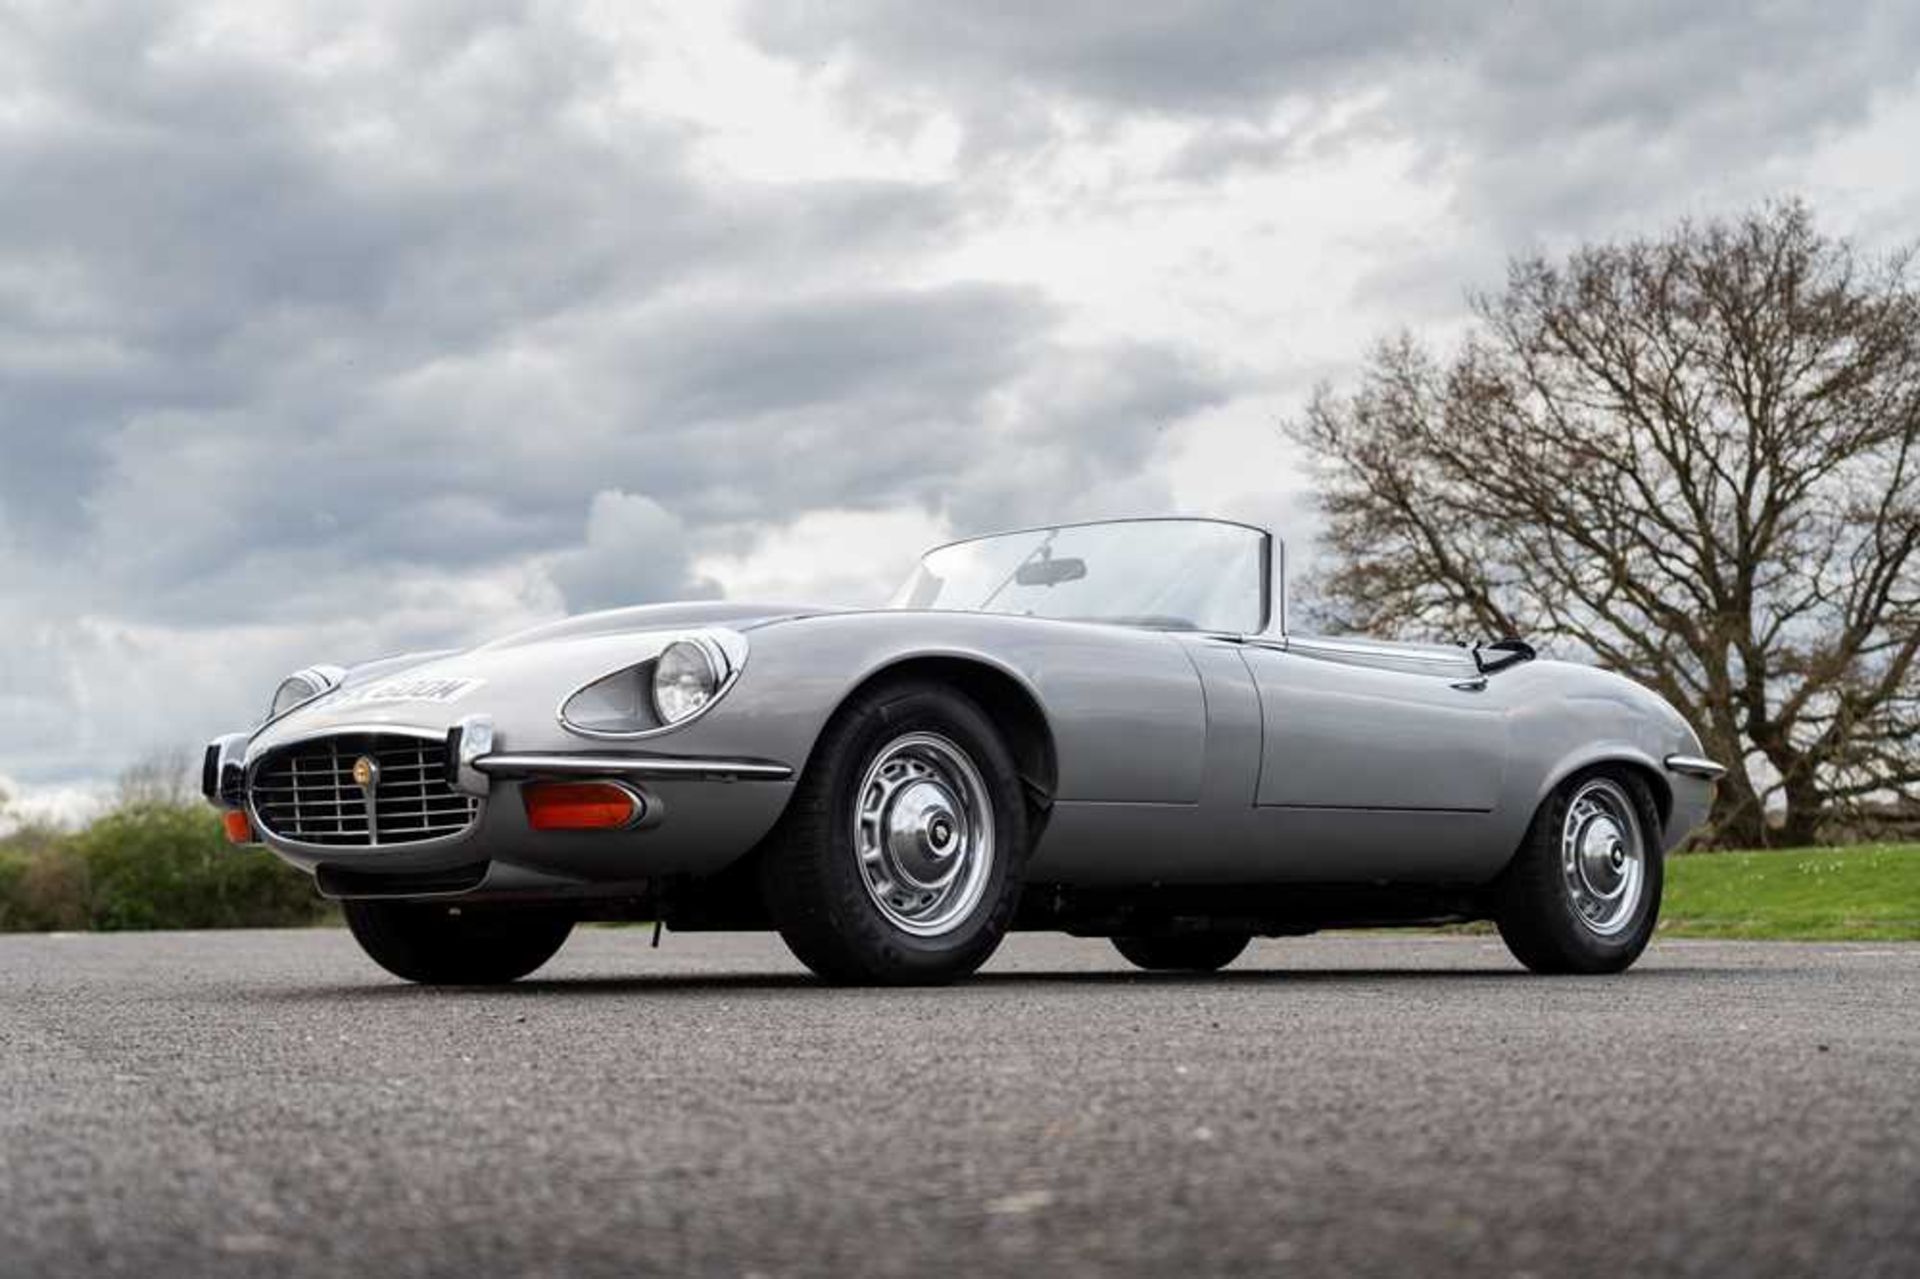 1974 Jaguar E-Type Series III V12 Roadster Only one family owner and 54,412 miles from new - Image 55 of 89